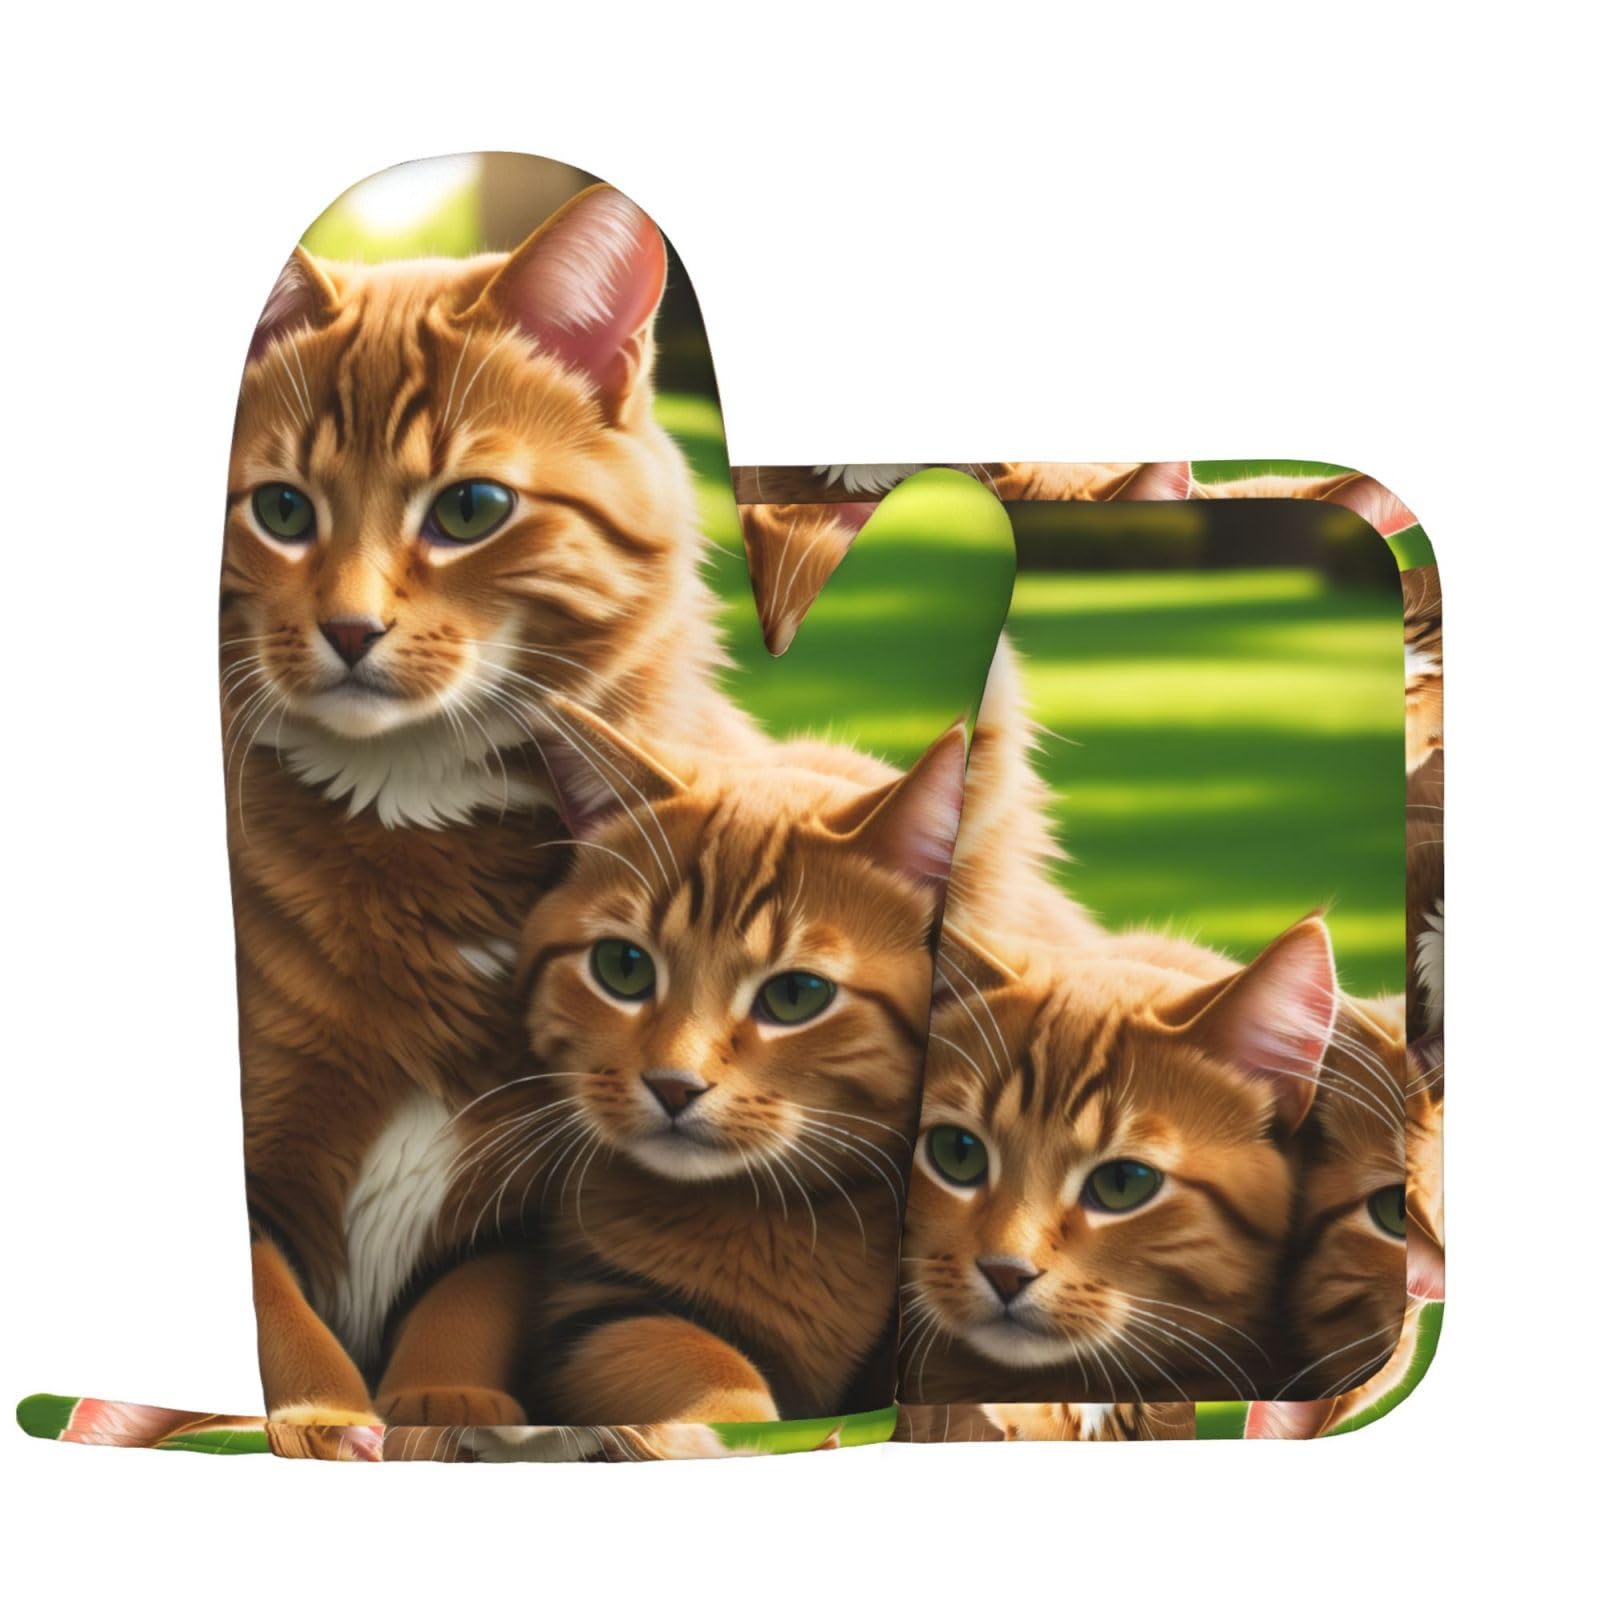 Four Cats Silicone Oven Mitts Pot Holder Sets 2pcs Cute Design Washable Non Slip Kitchen Heat Resistant Mat Women's Cooking Gloves for Baking and BBQ Wear